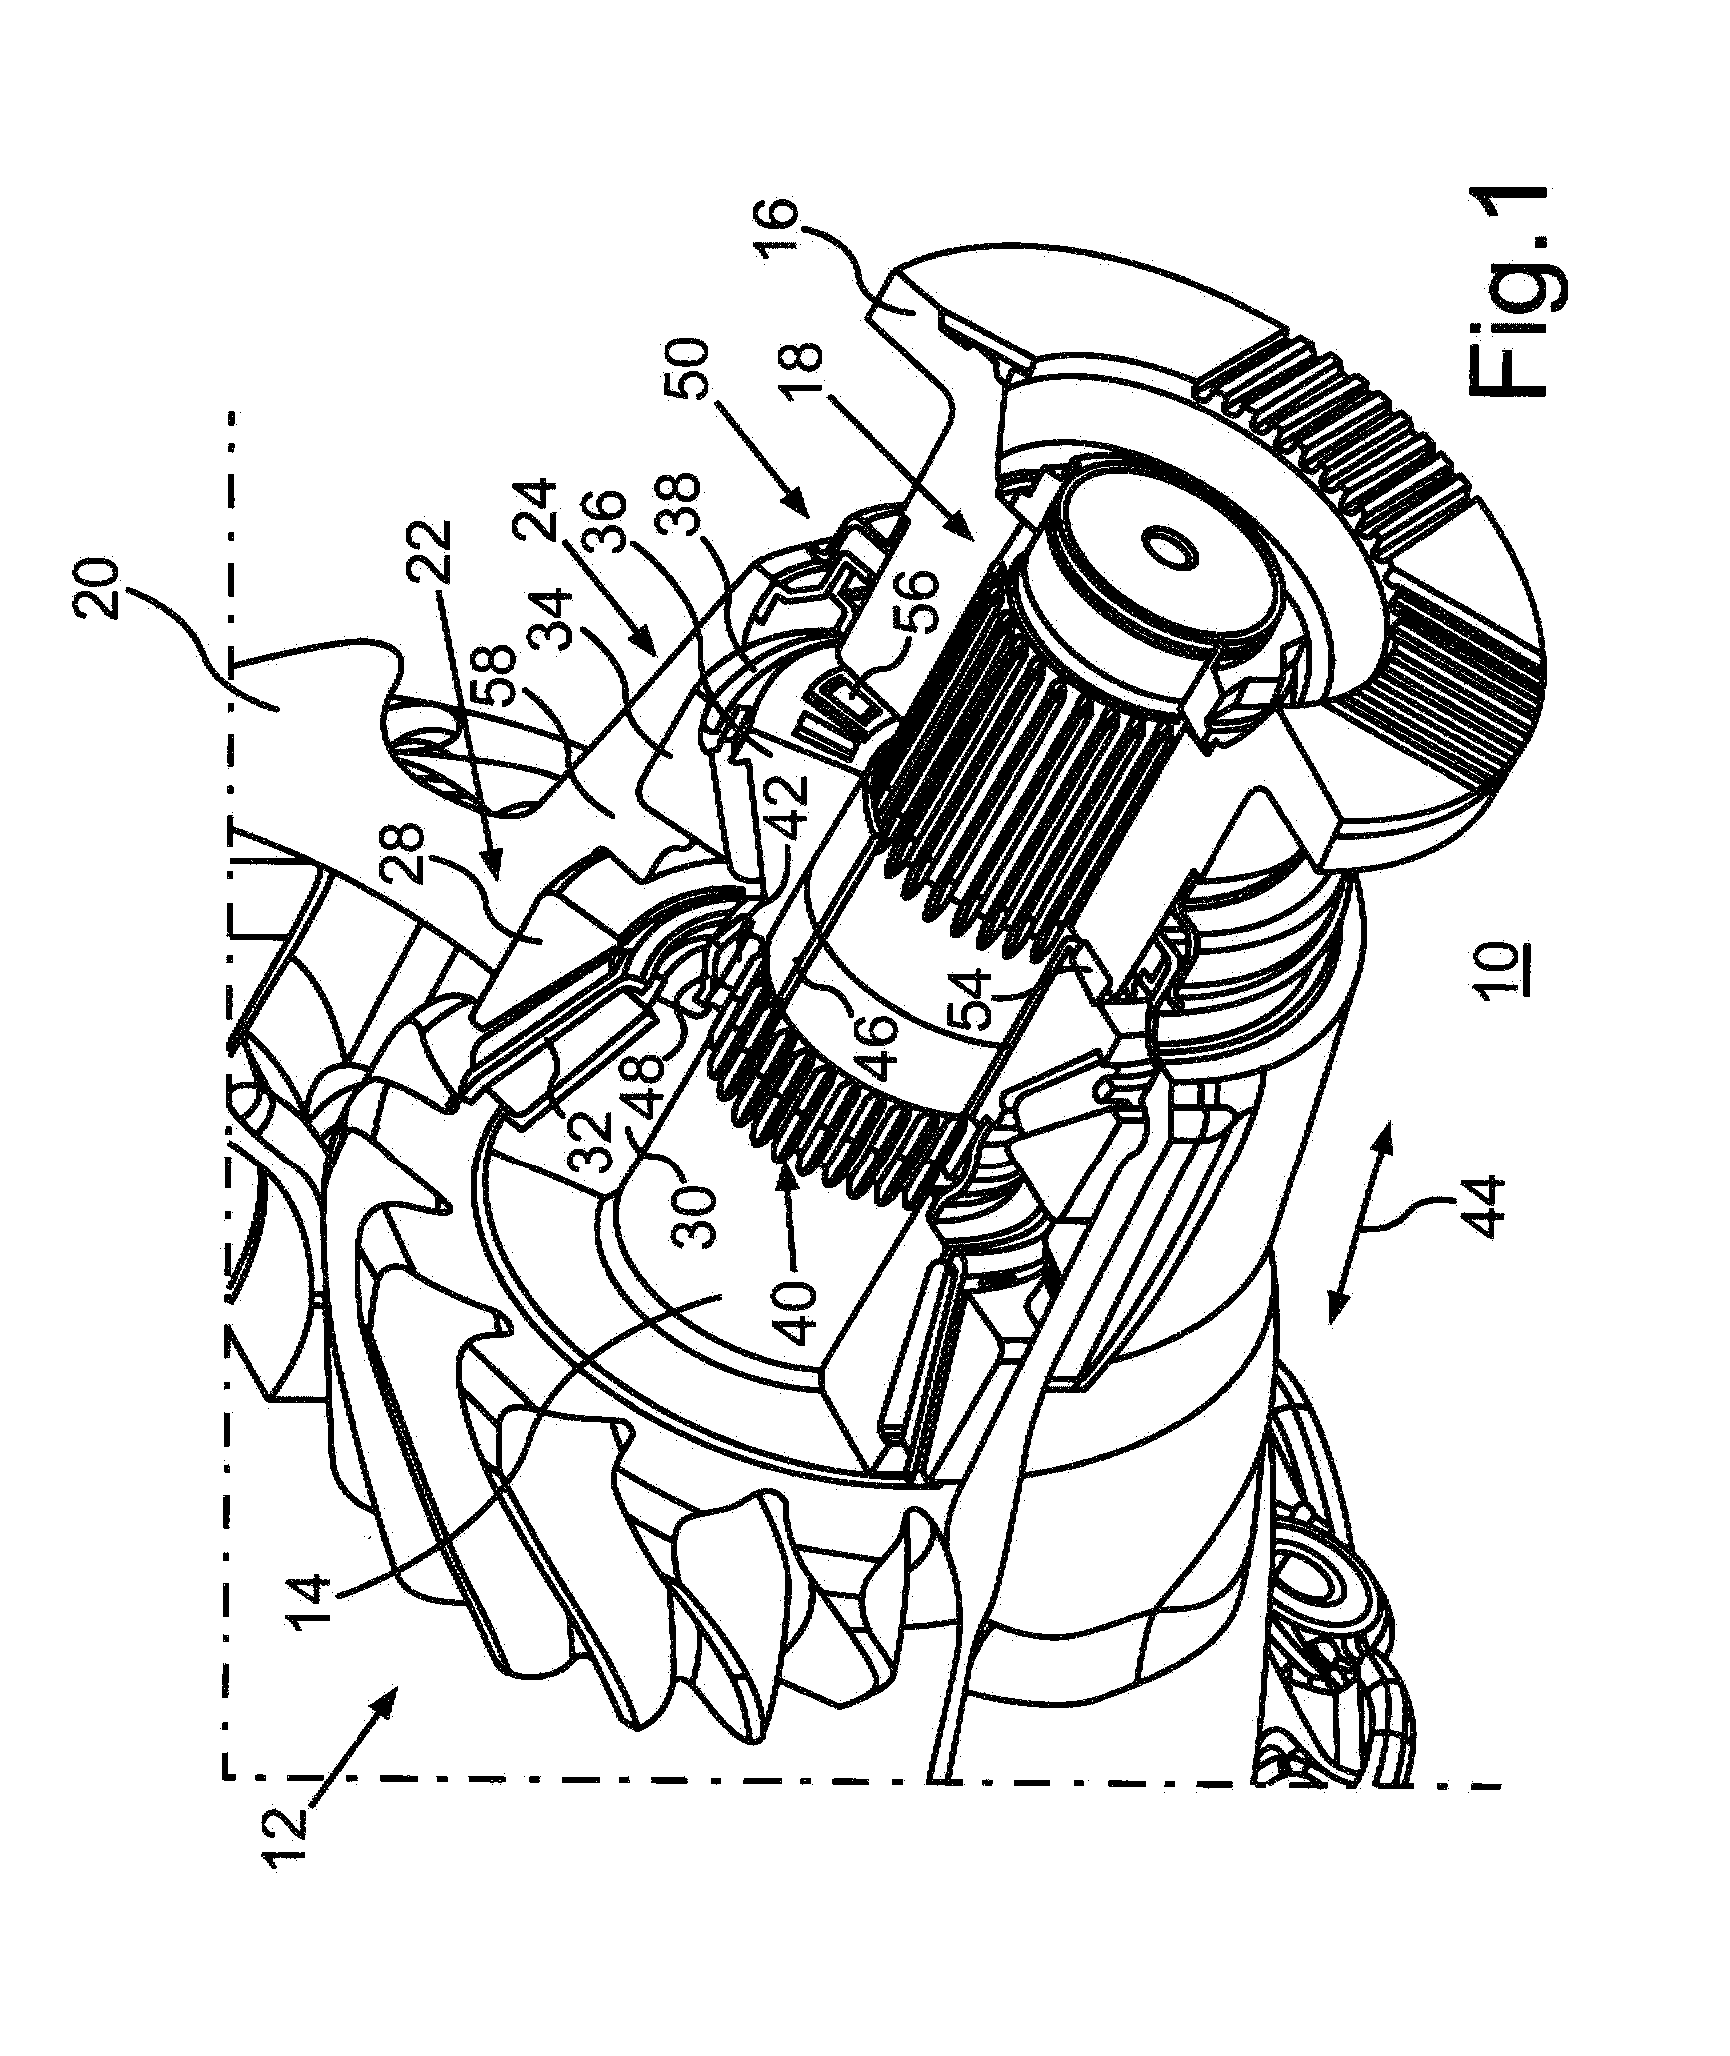 Bearing mounting arrangement for a drive train of a motor vehicle